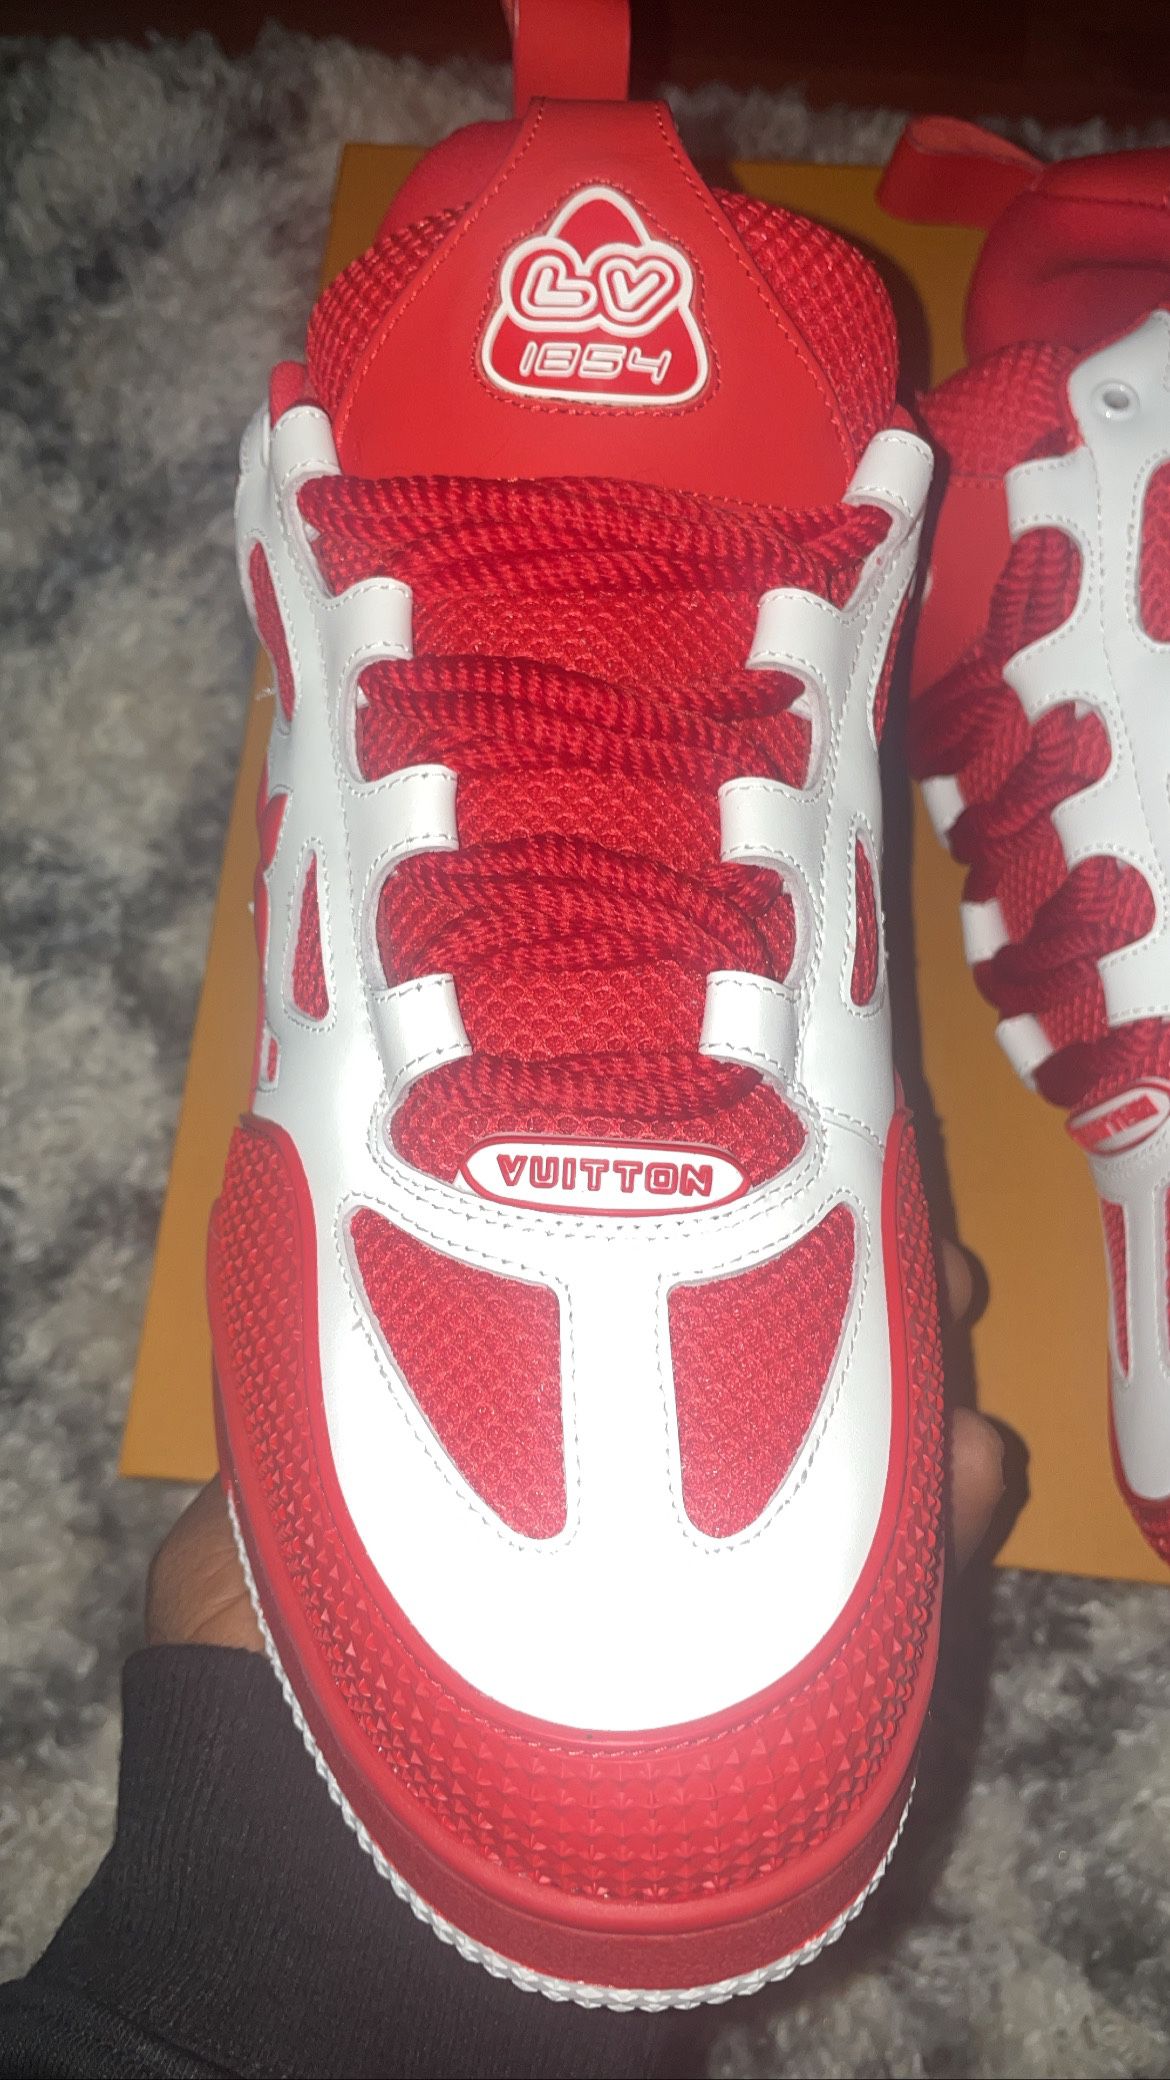 Louis Vuitton LV Skate Sneaker Red White for Sale in New York, NY